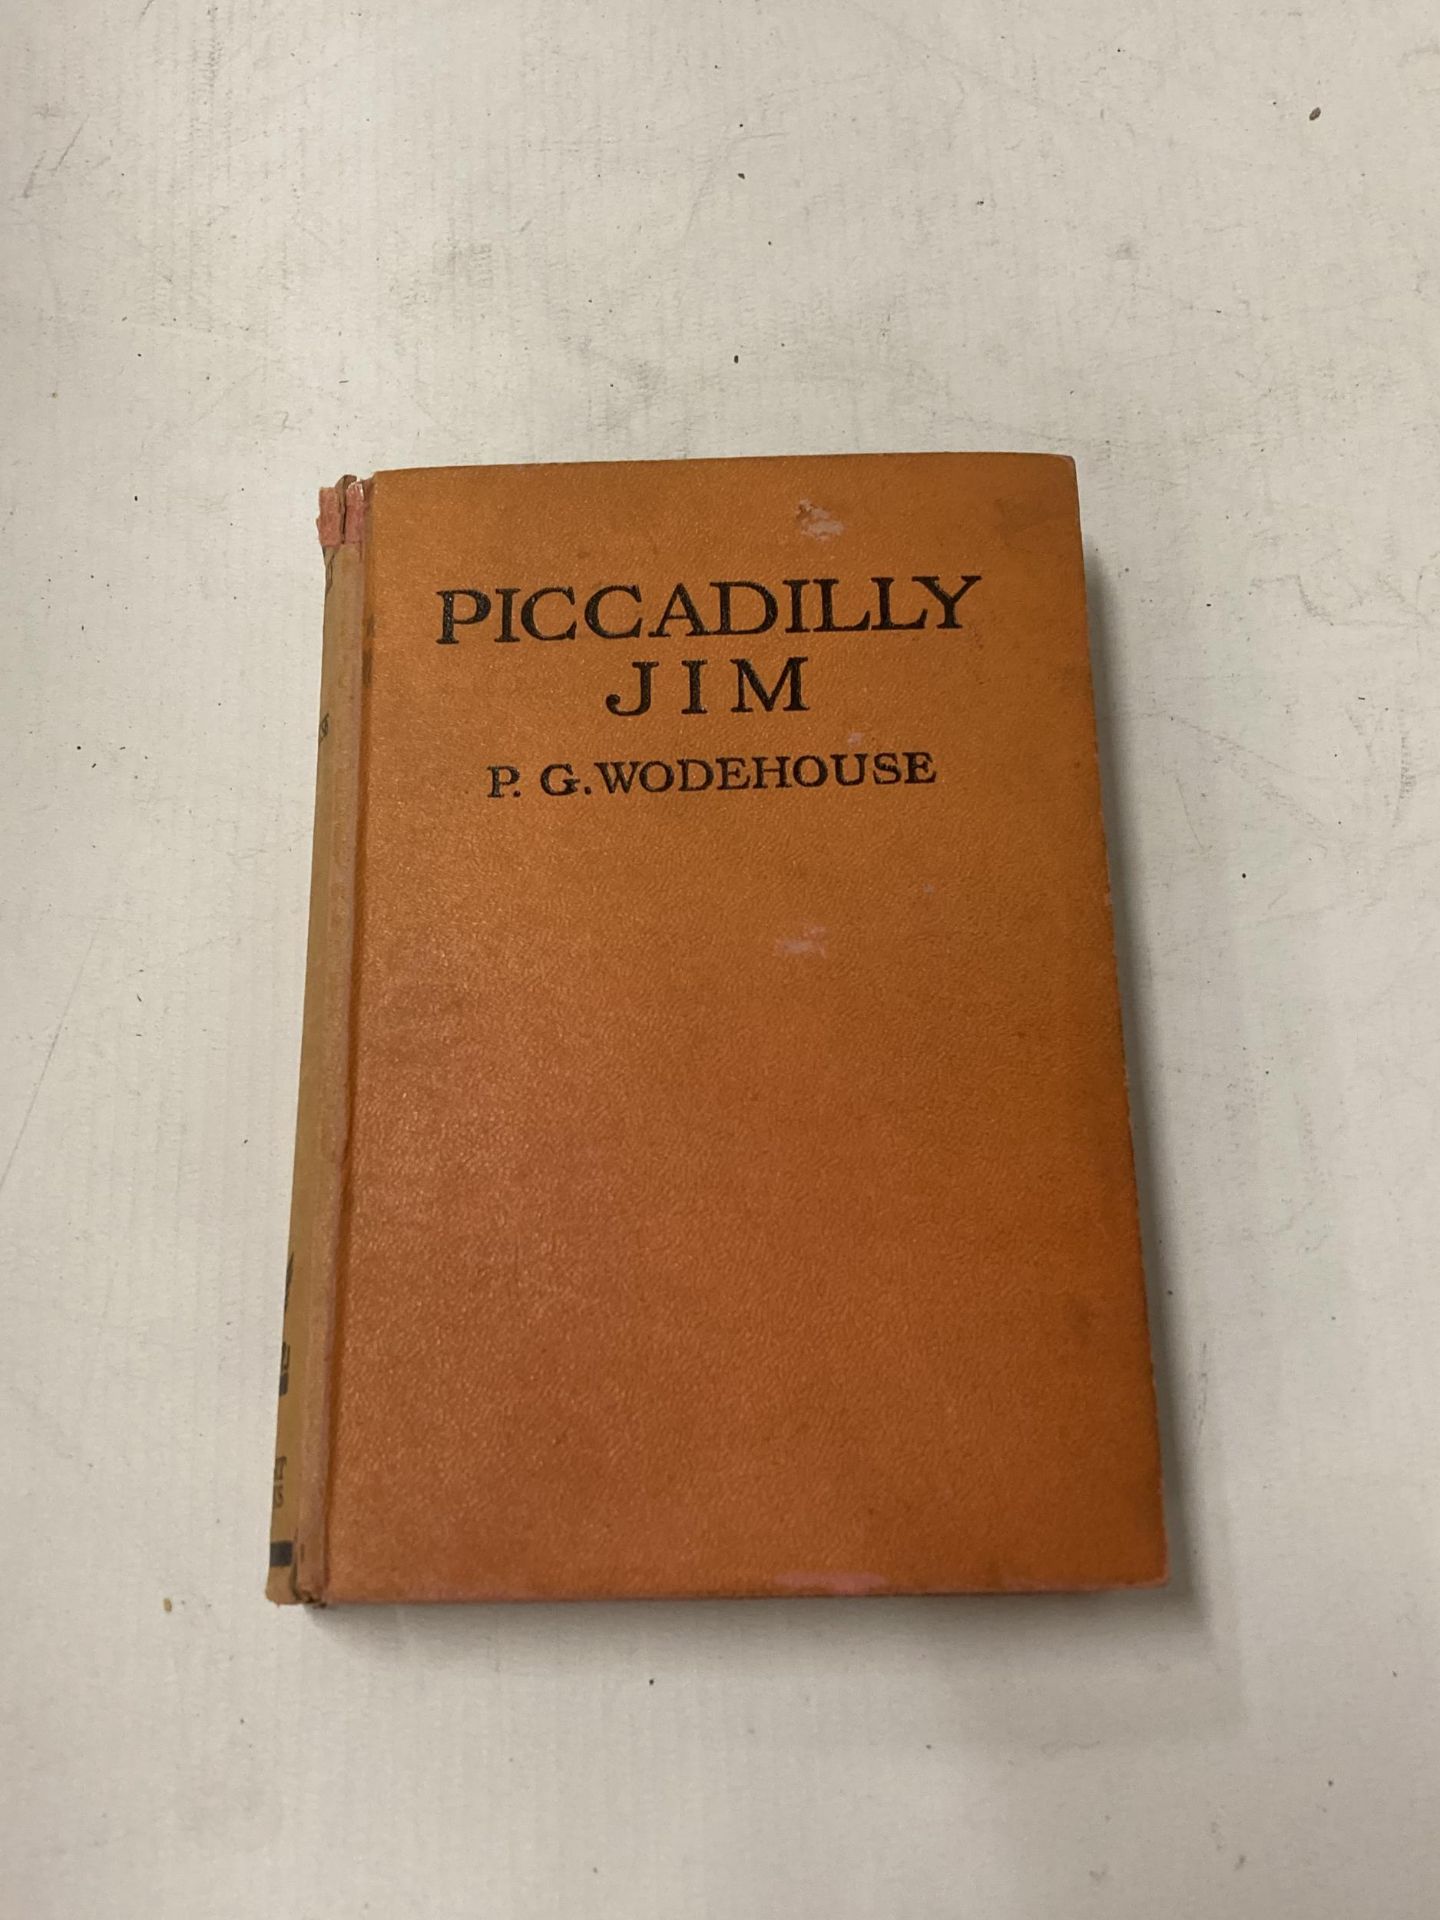 P.G WODEHOUSE 'PICADILLY JIM' 20TH PRINT, 230,000 COPIES ONLY, BOOK